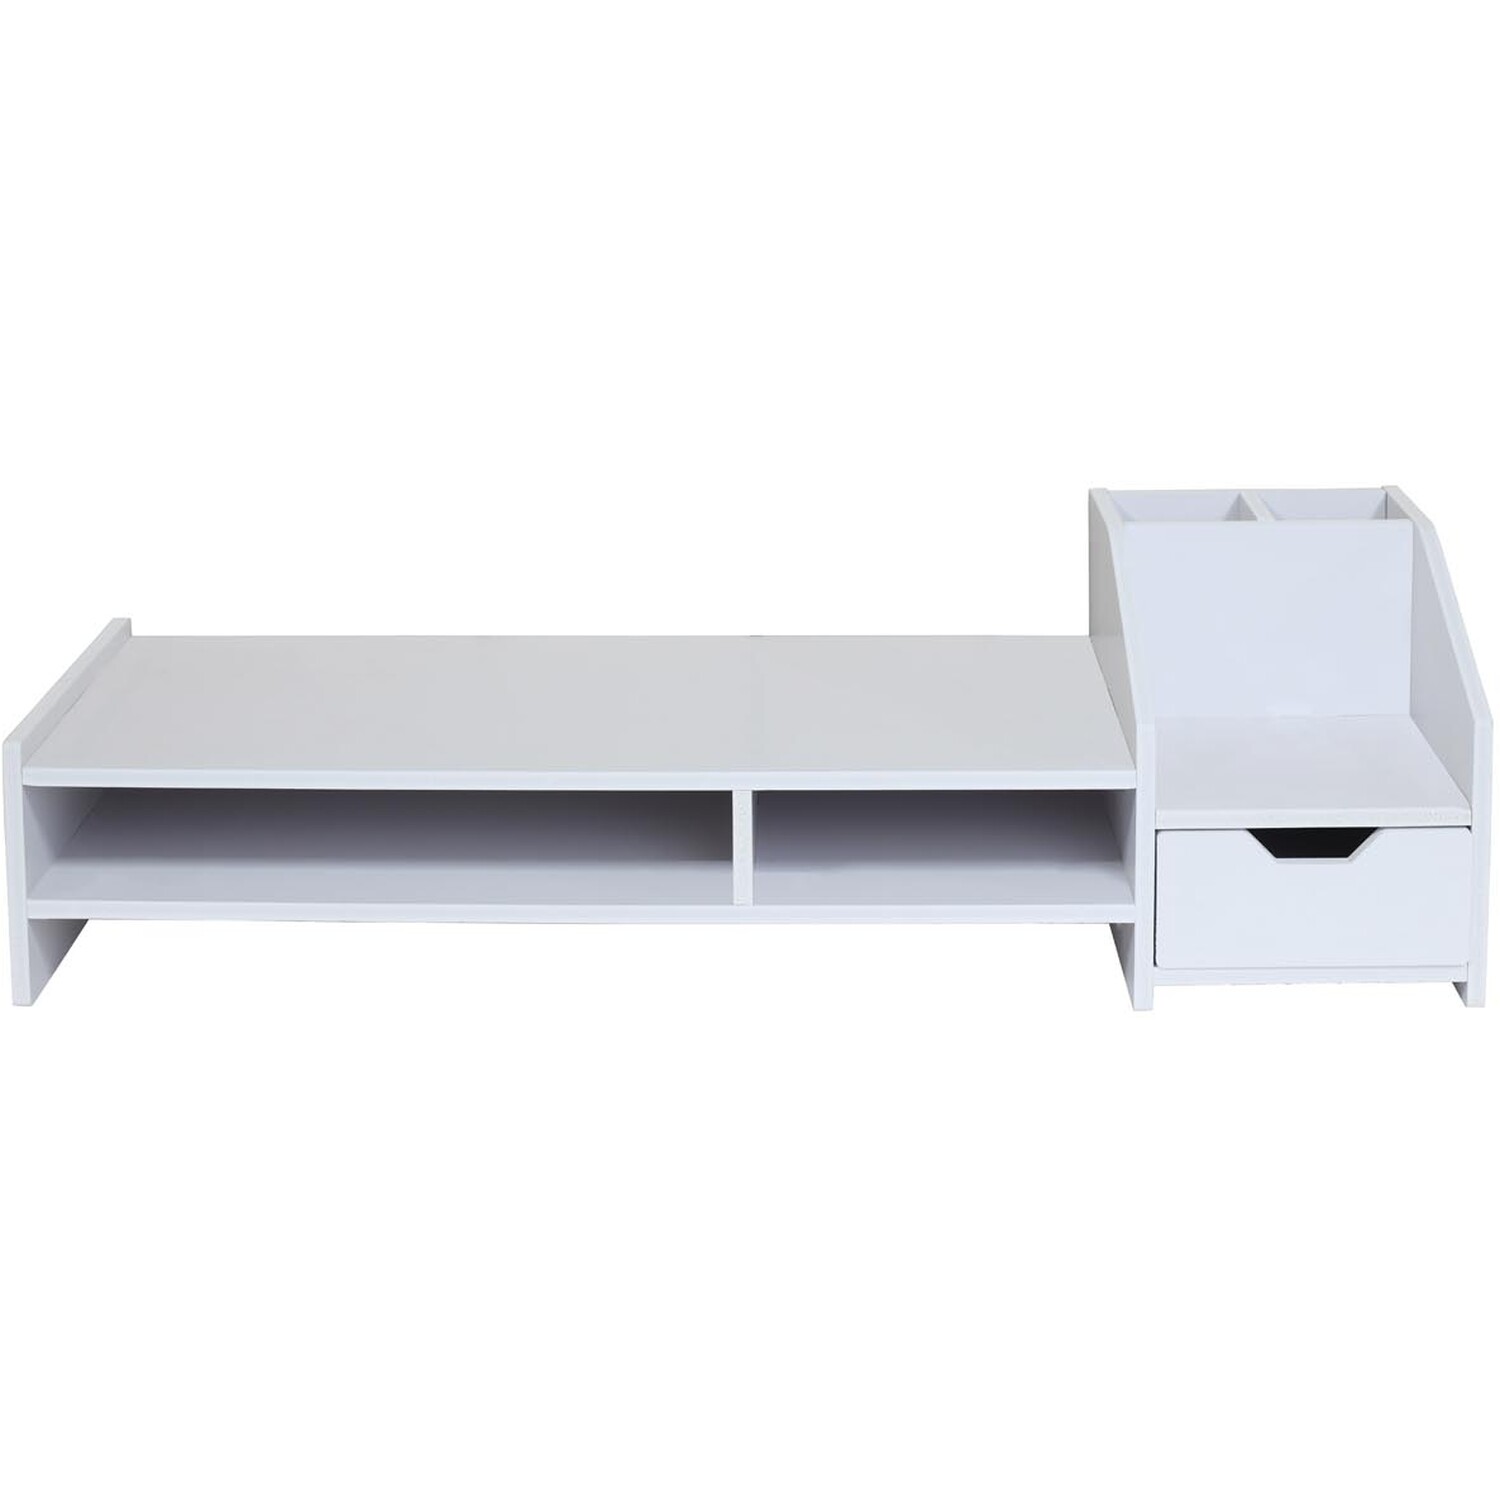 Flatpack Monitor Stand - White Image 2